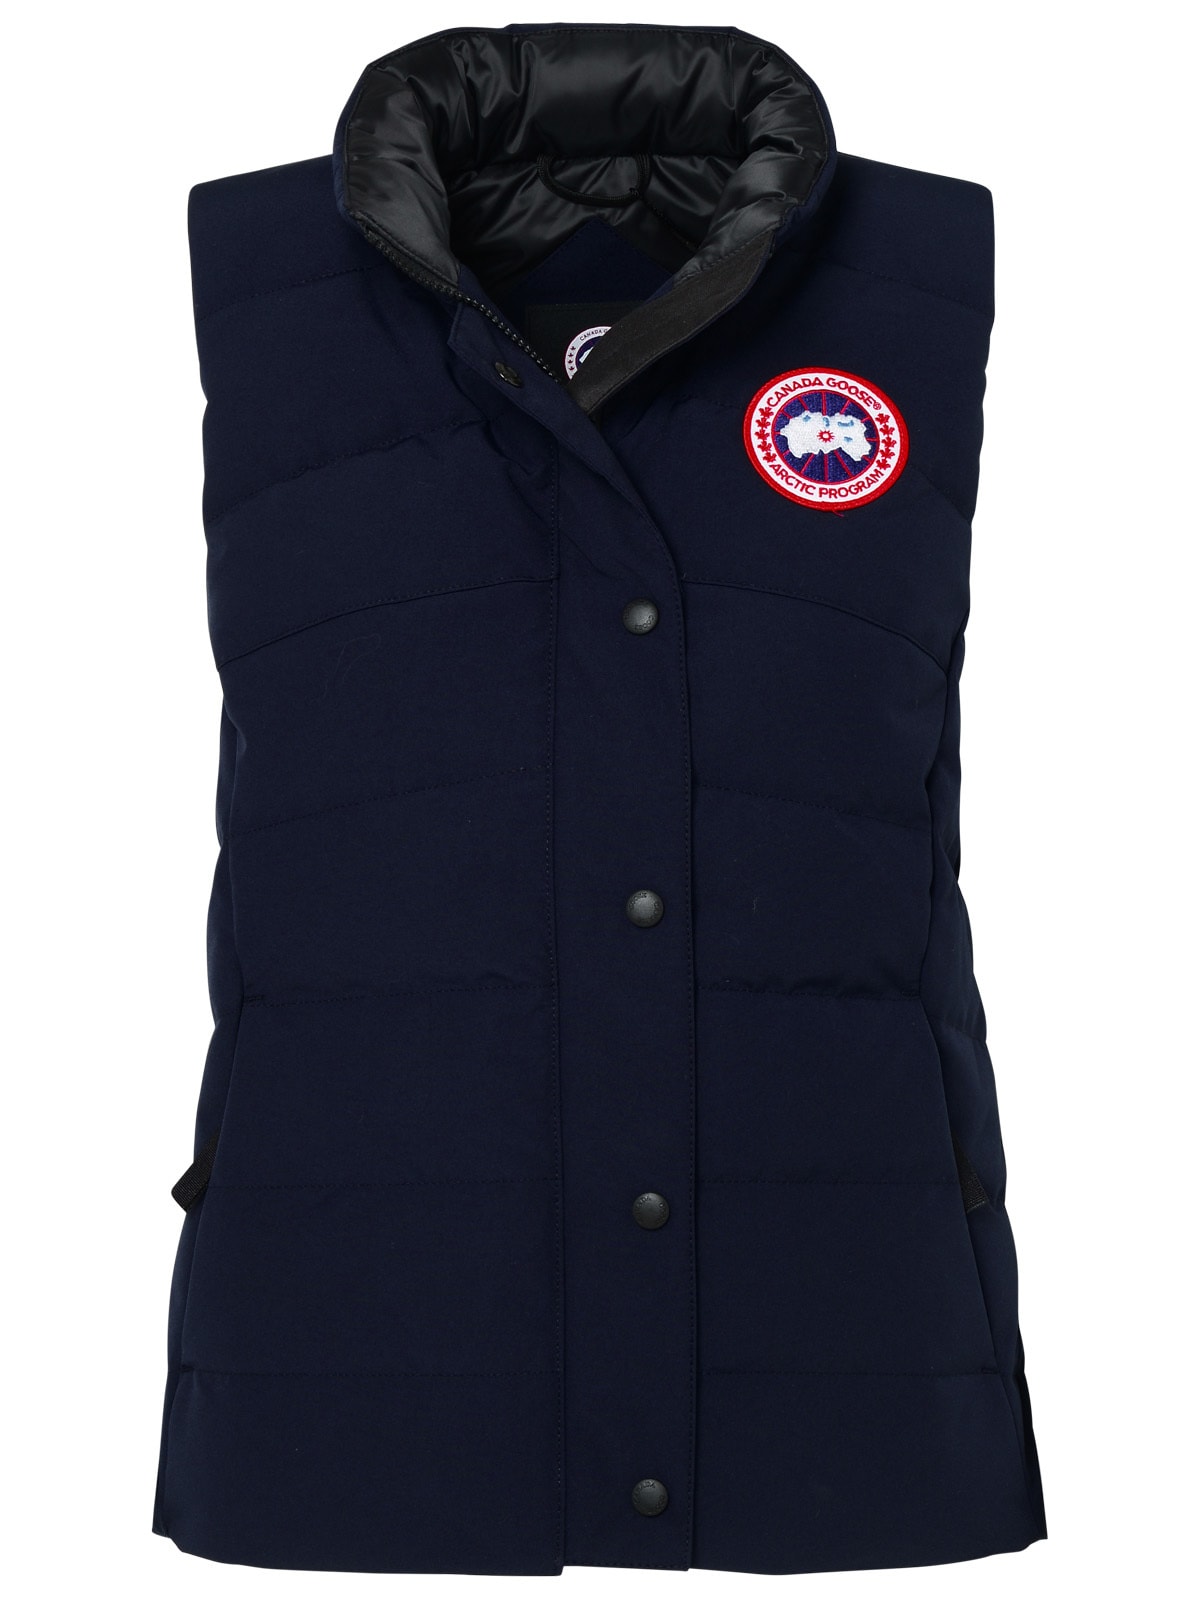 CANADA GOOSE BLUE POLYESTER FREESTYLE VEST